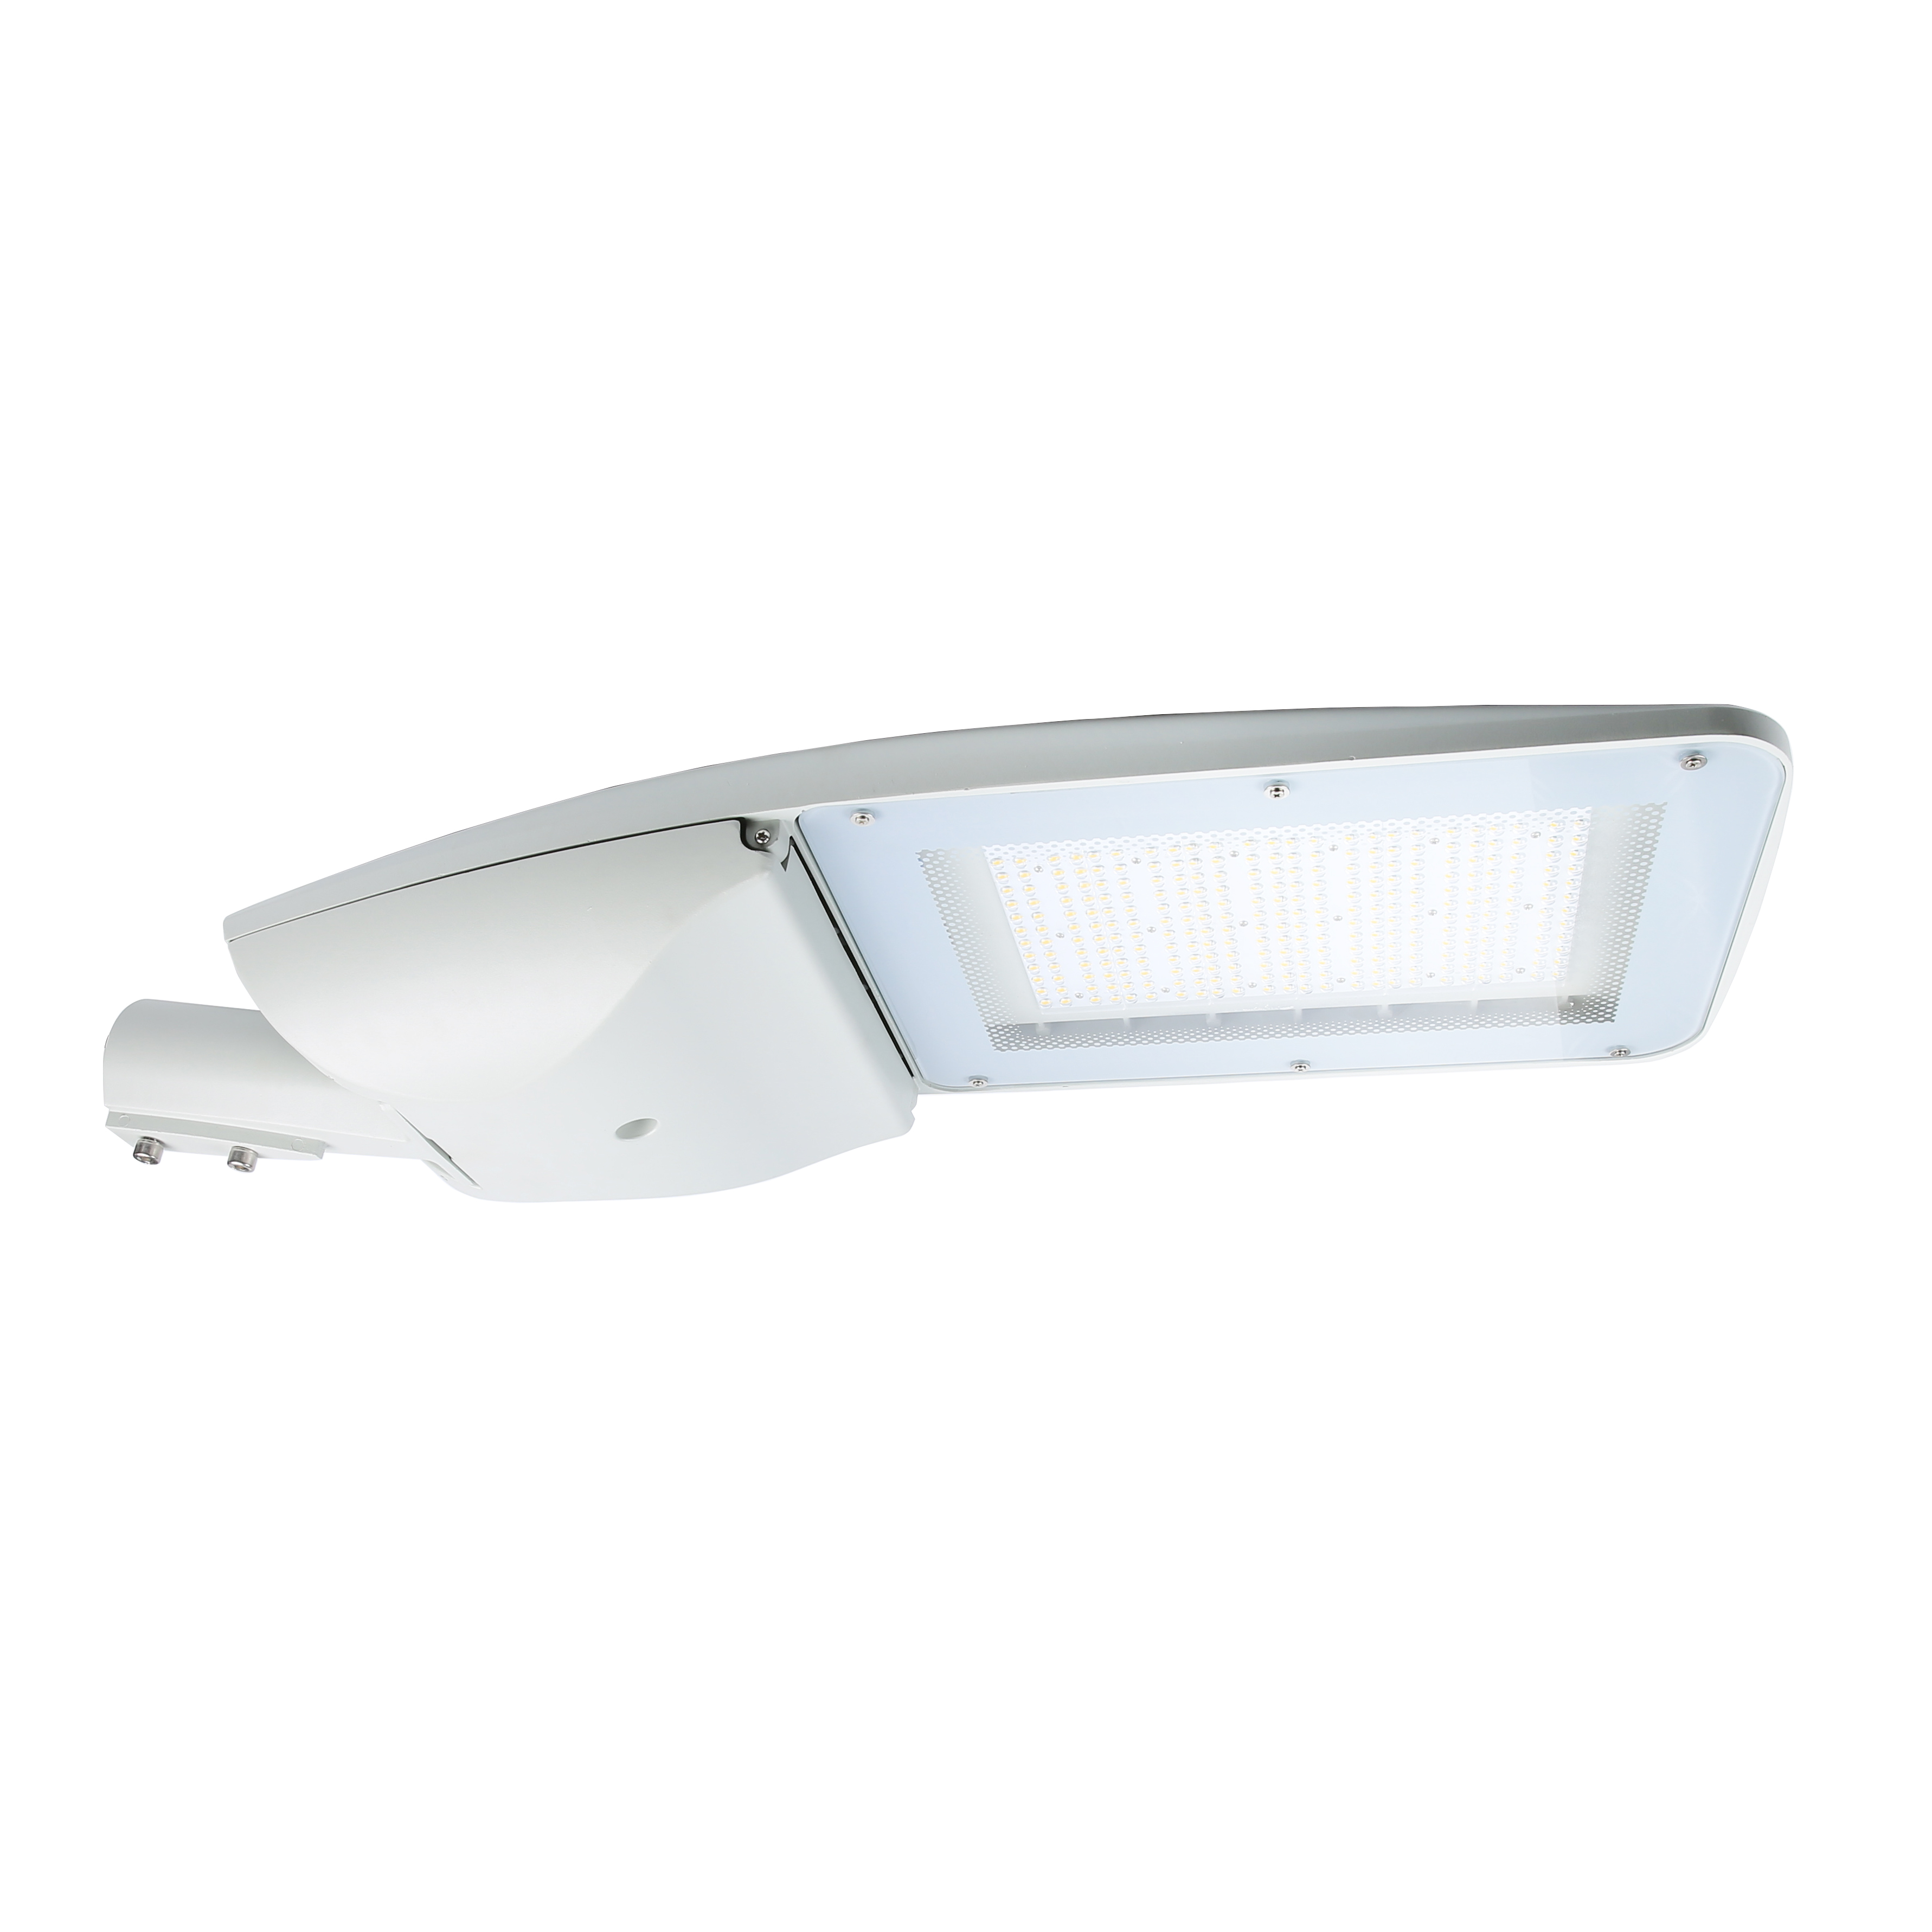 Most popular new product led street light with long working life